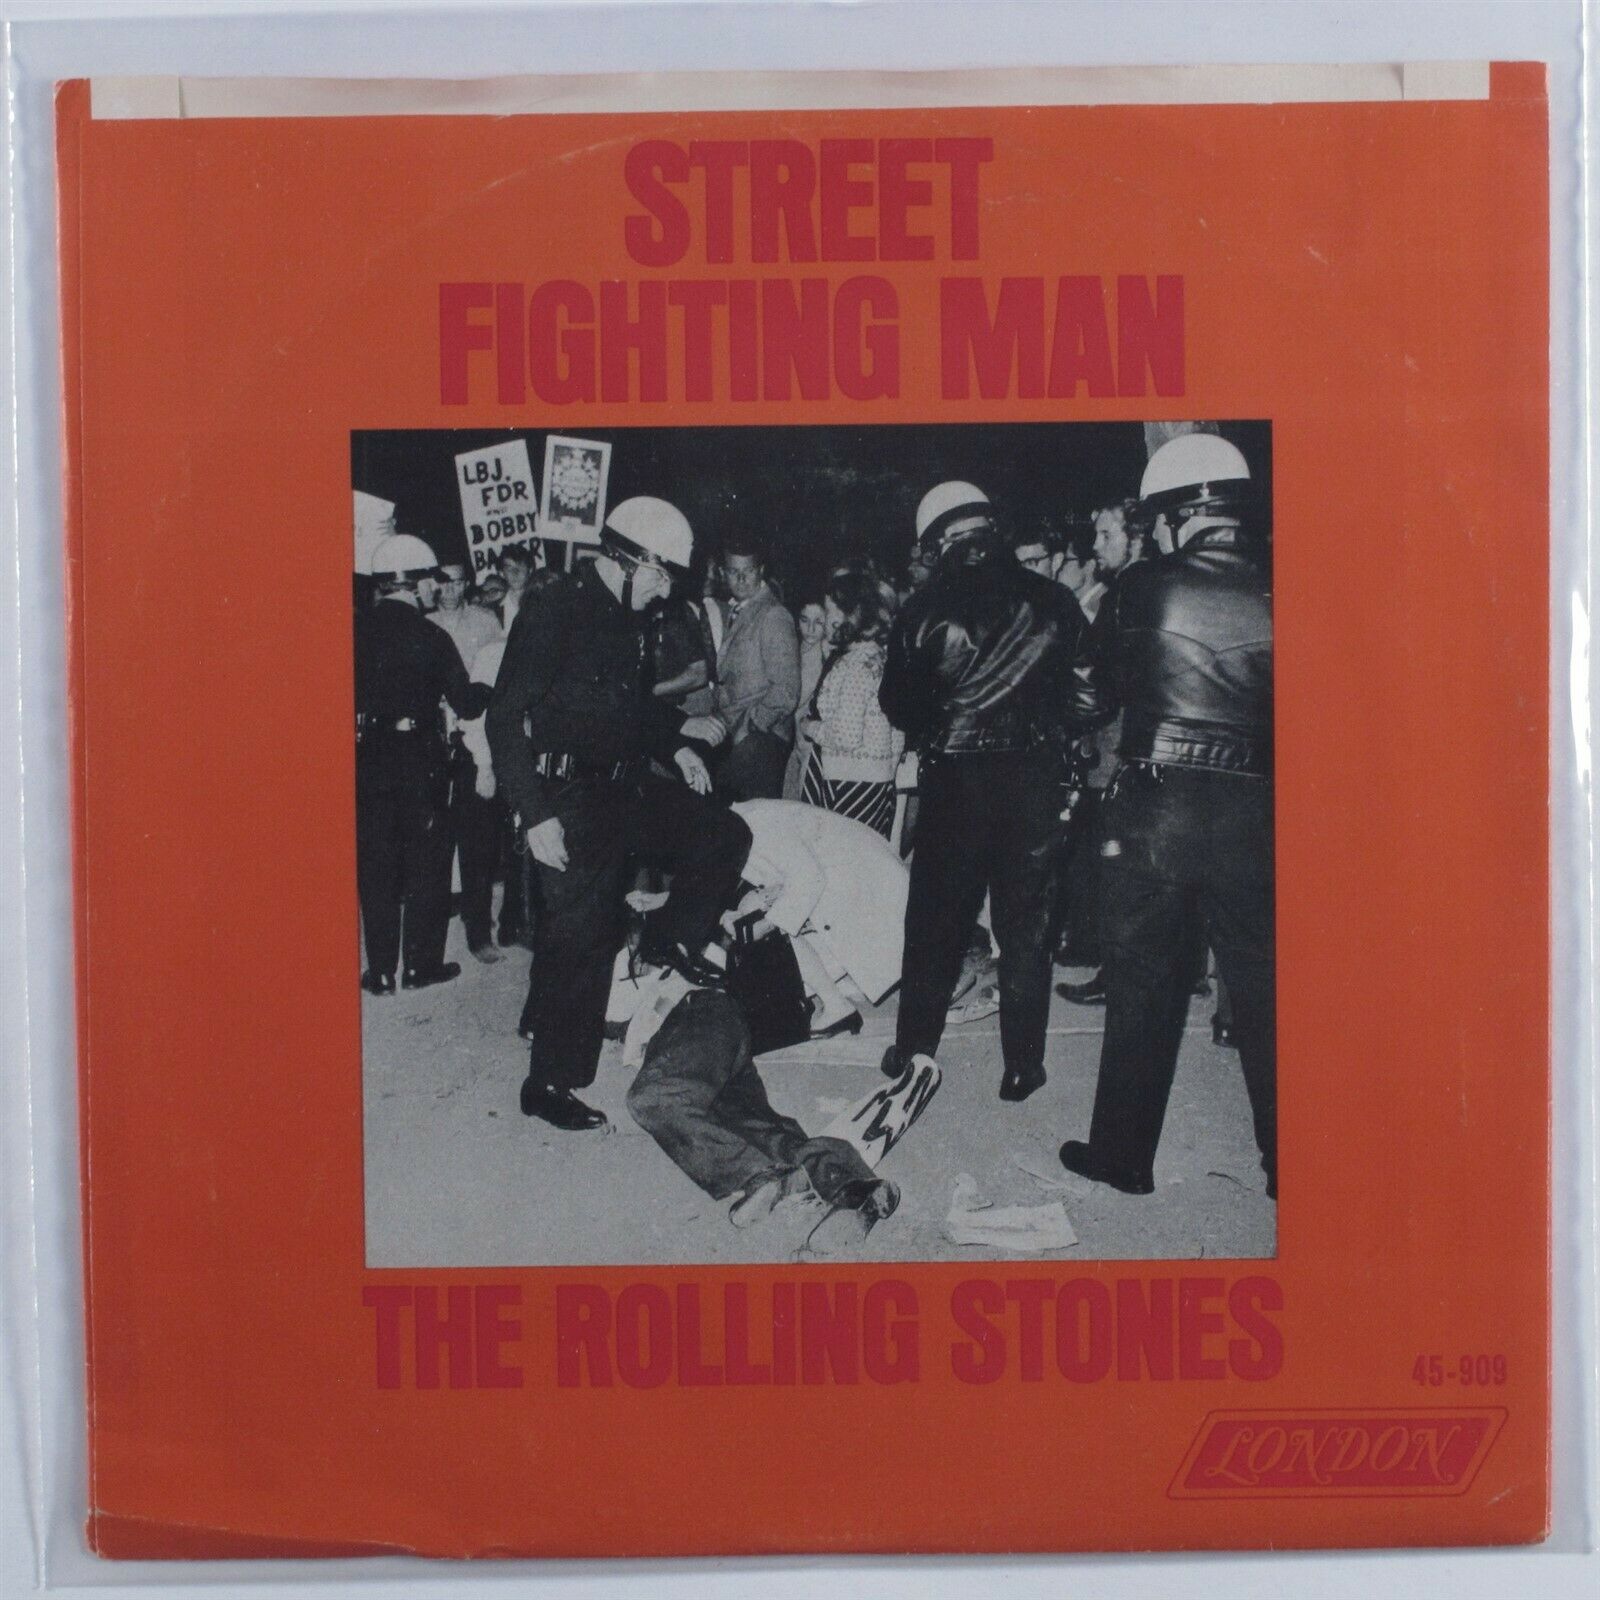 Pic 1 Rock 45 ROLLING STONES Street Fighting Man LONDON VG+/VG++ picture sleeve